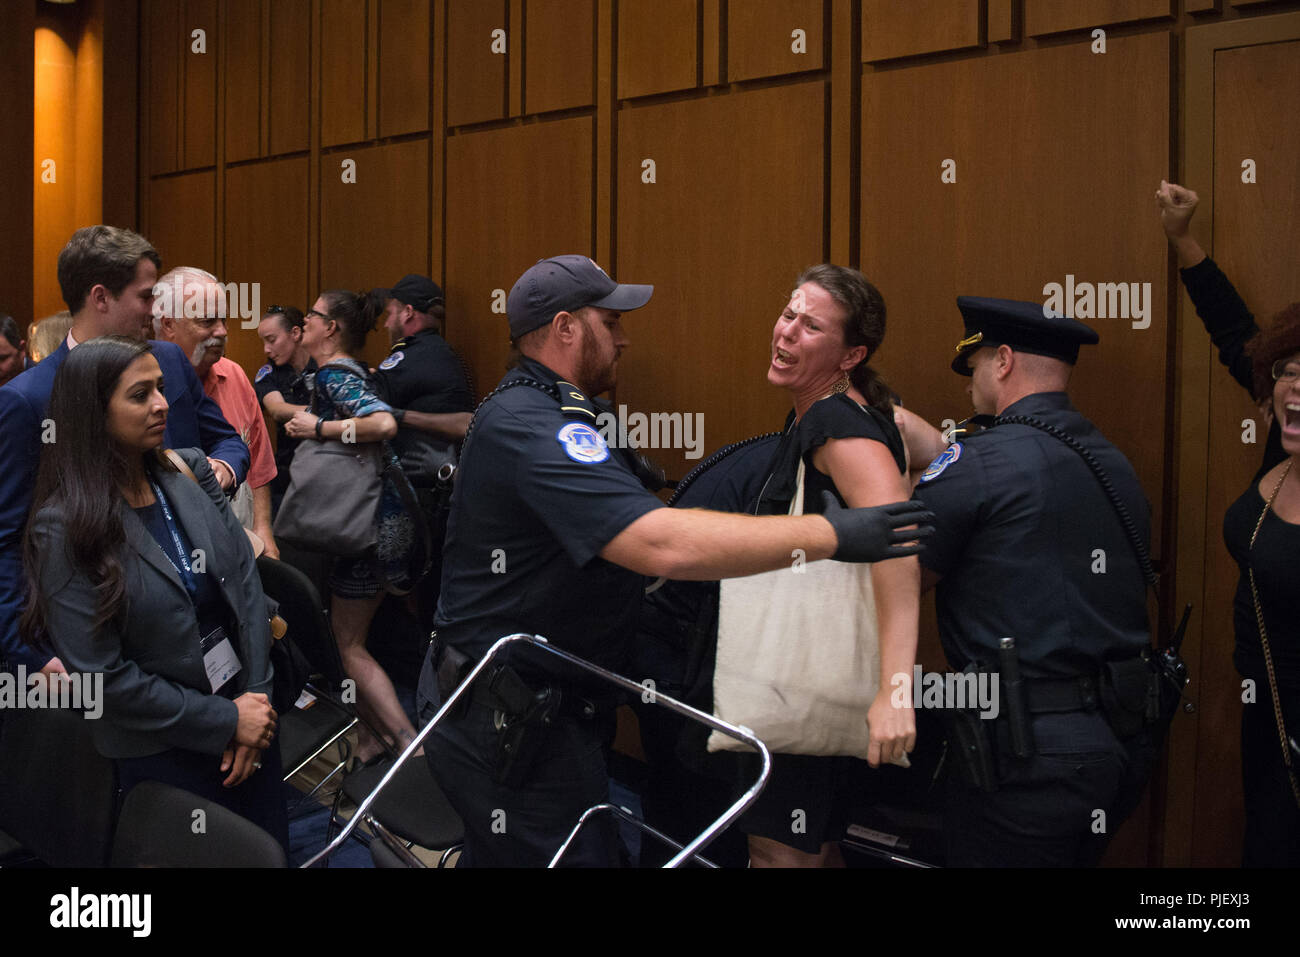 Washington, District of Columbia, USA. 6th Sep, 2018. Protestors disrupt U.S. Supreme Court nominee Judge Brett Kavanaugh's confirmation hearing on Capitol Hill. Kavanaugh was nominated by U.S. President Donald Trump to fill the vacancy on the court left by retiring Justice Anthony Kennedy. Credit: Erin Scott/ZUMA Wire/Alamy Live News Stock Photo